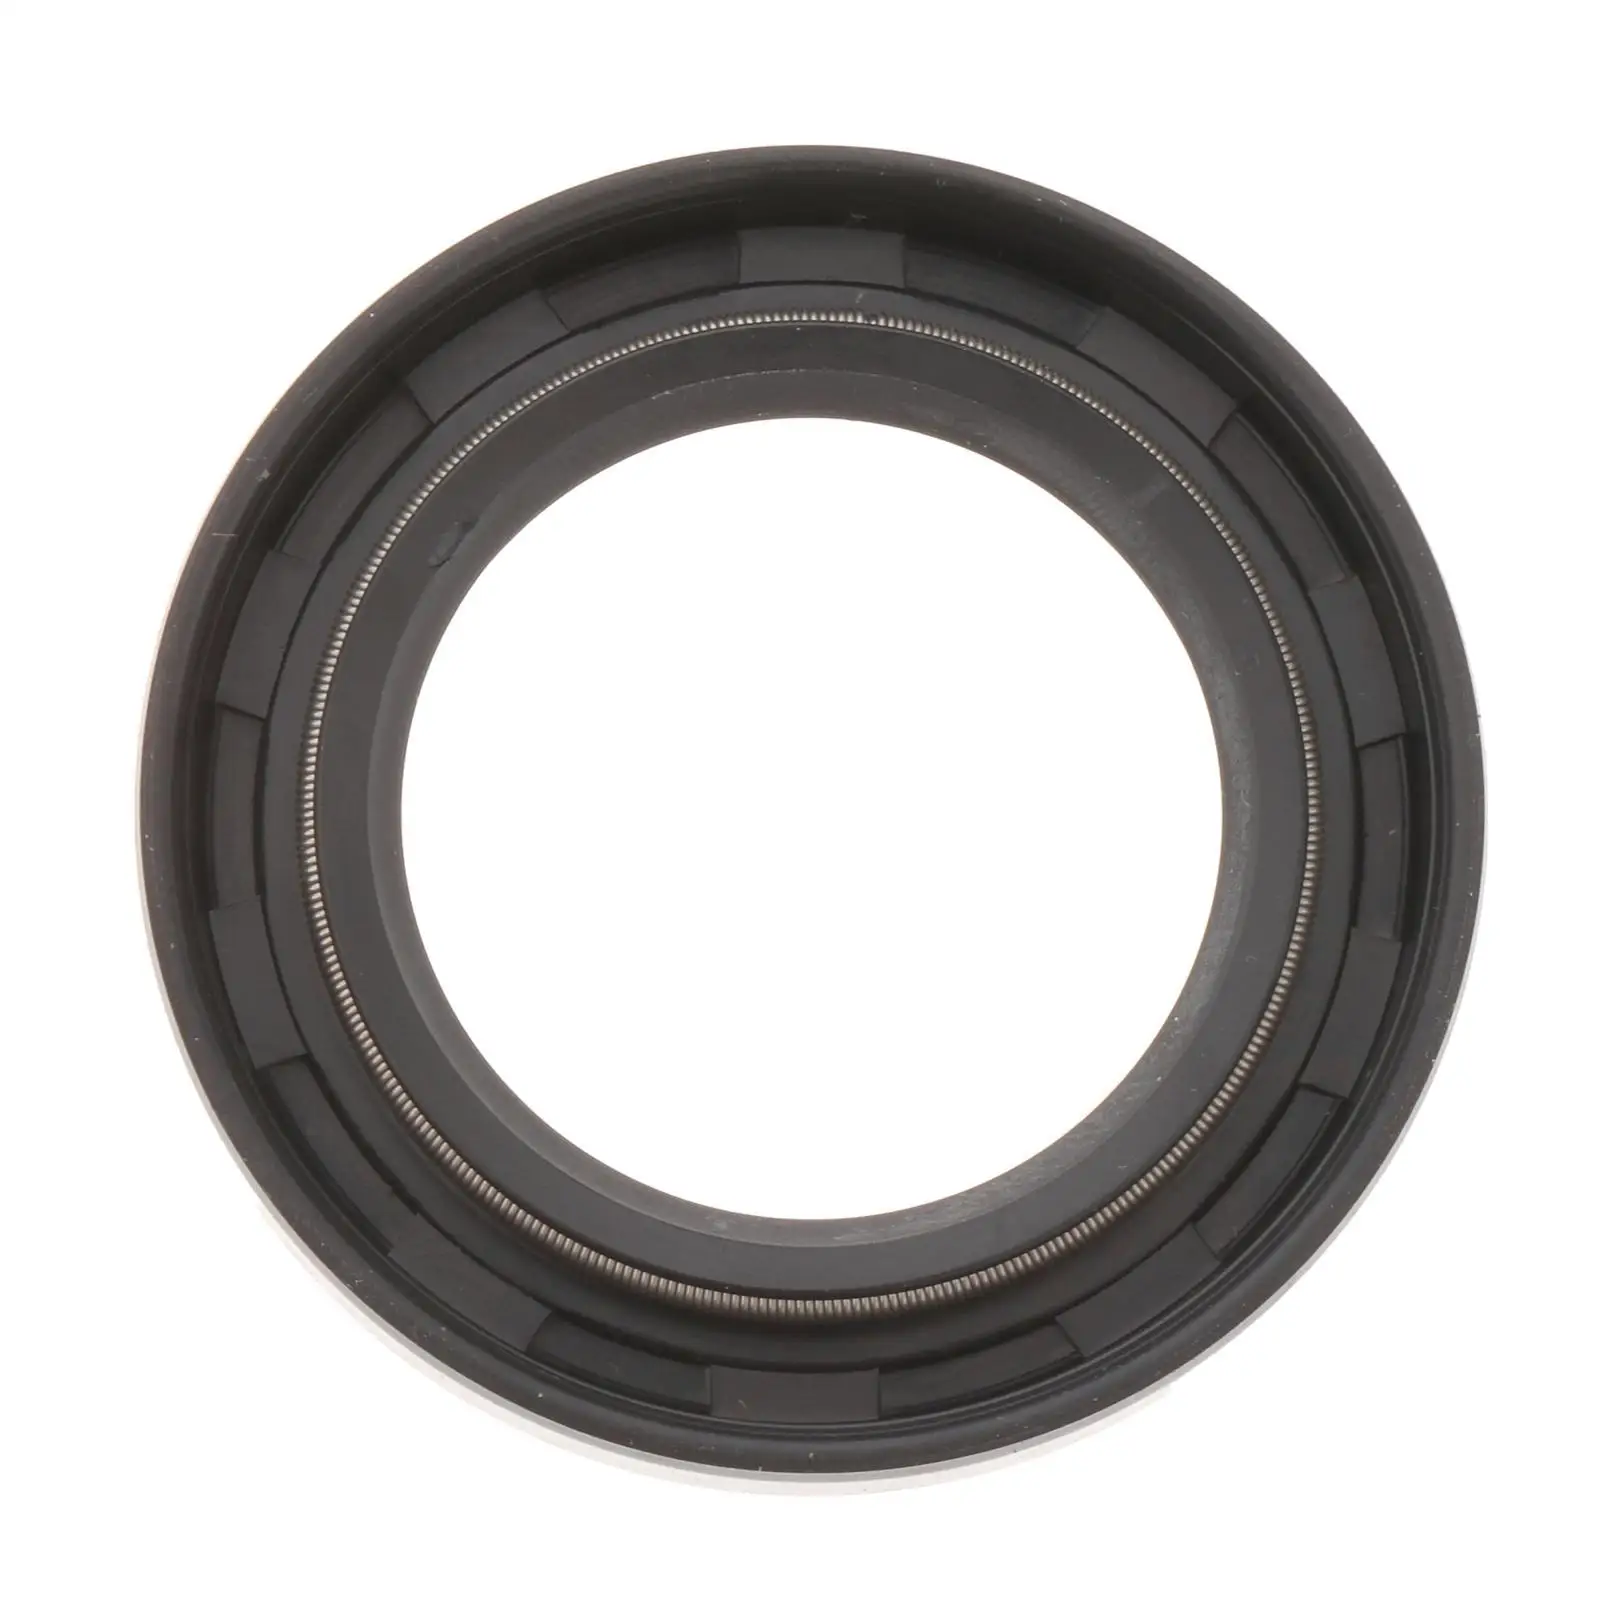 Oil Seal Fit for Yamaha Outboard  to Install Direct Replaces